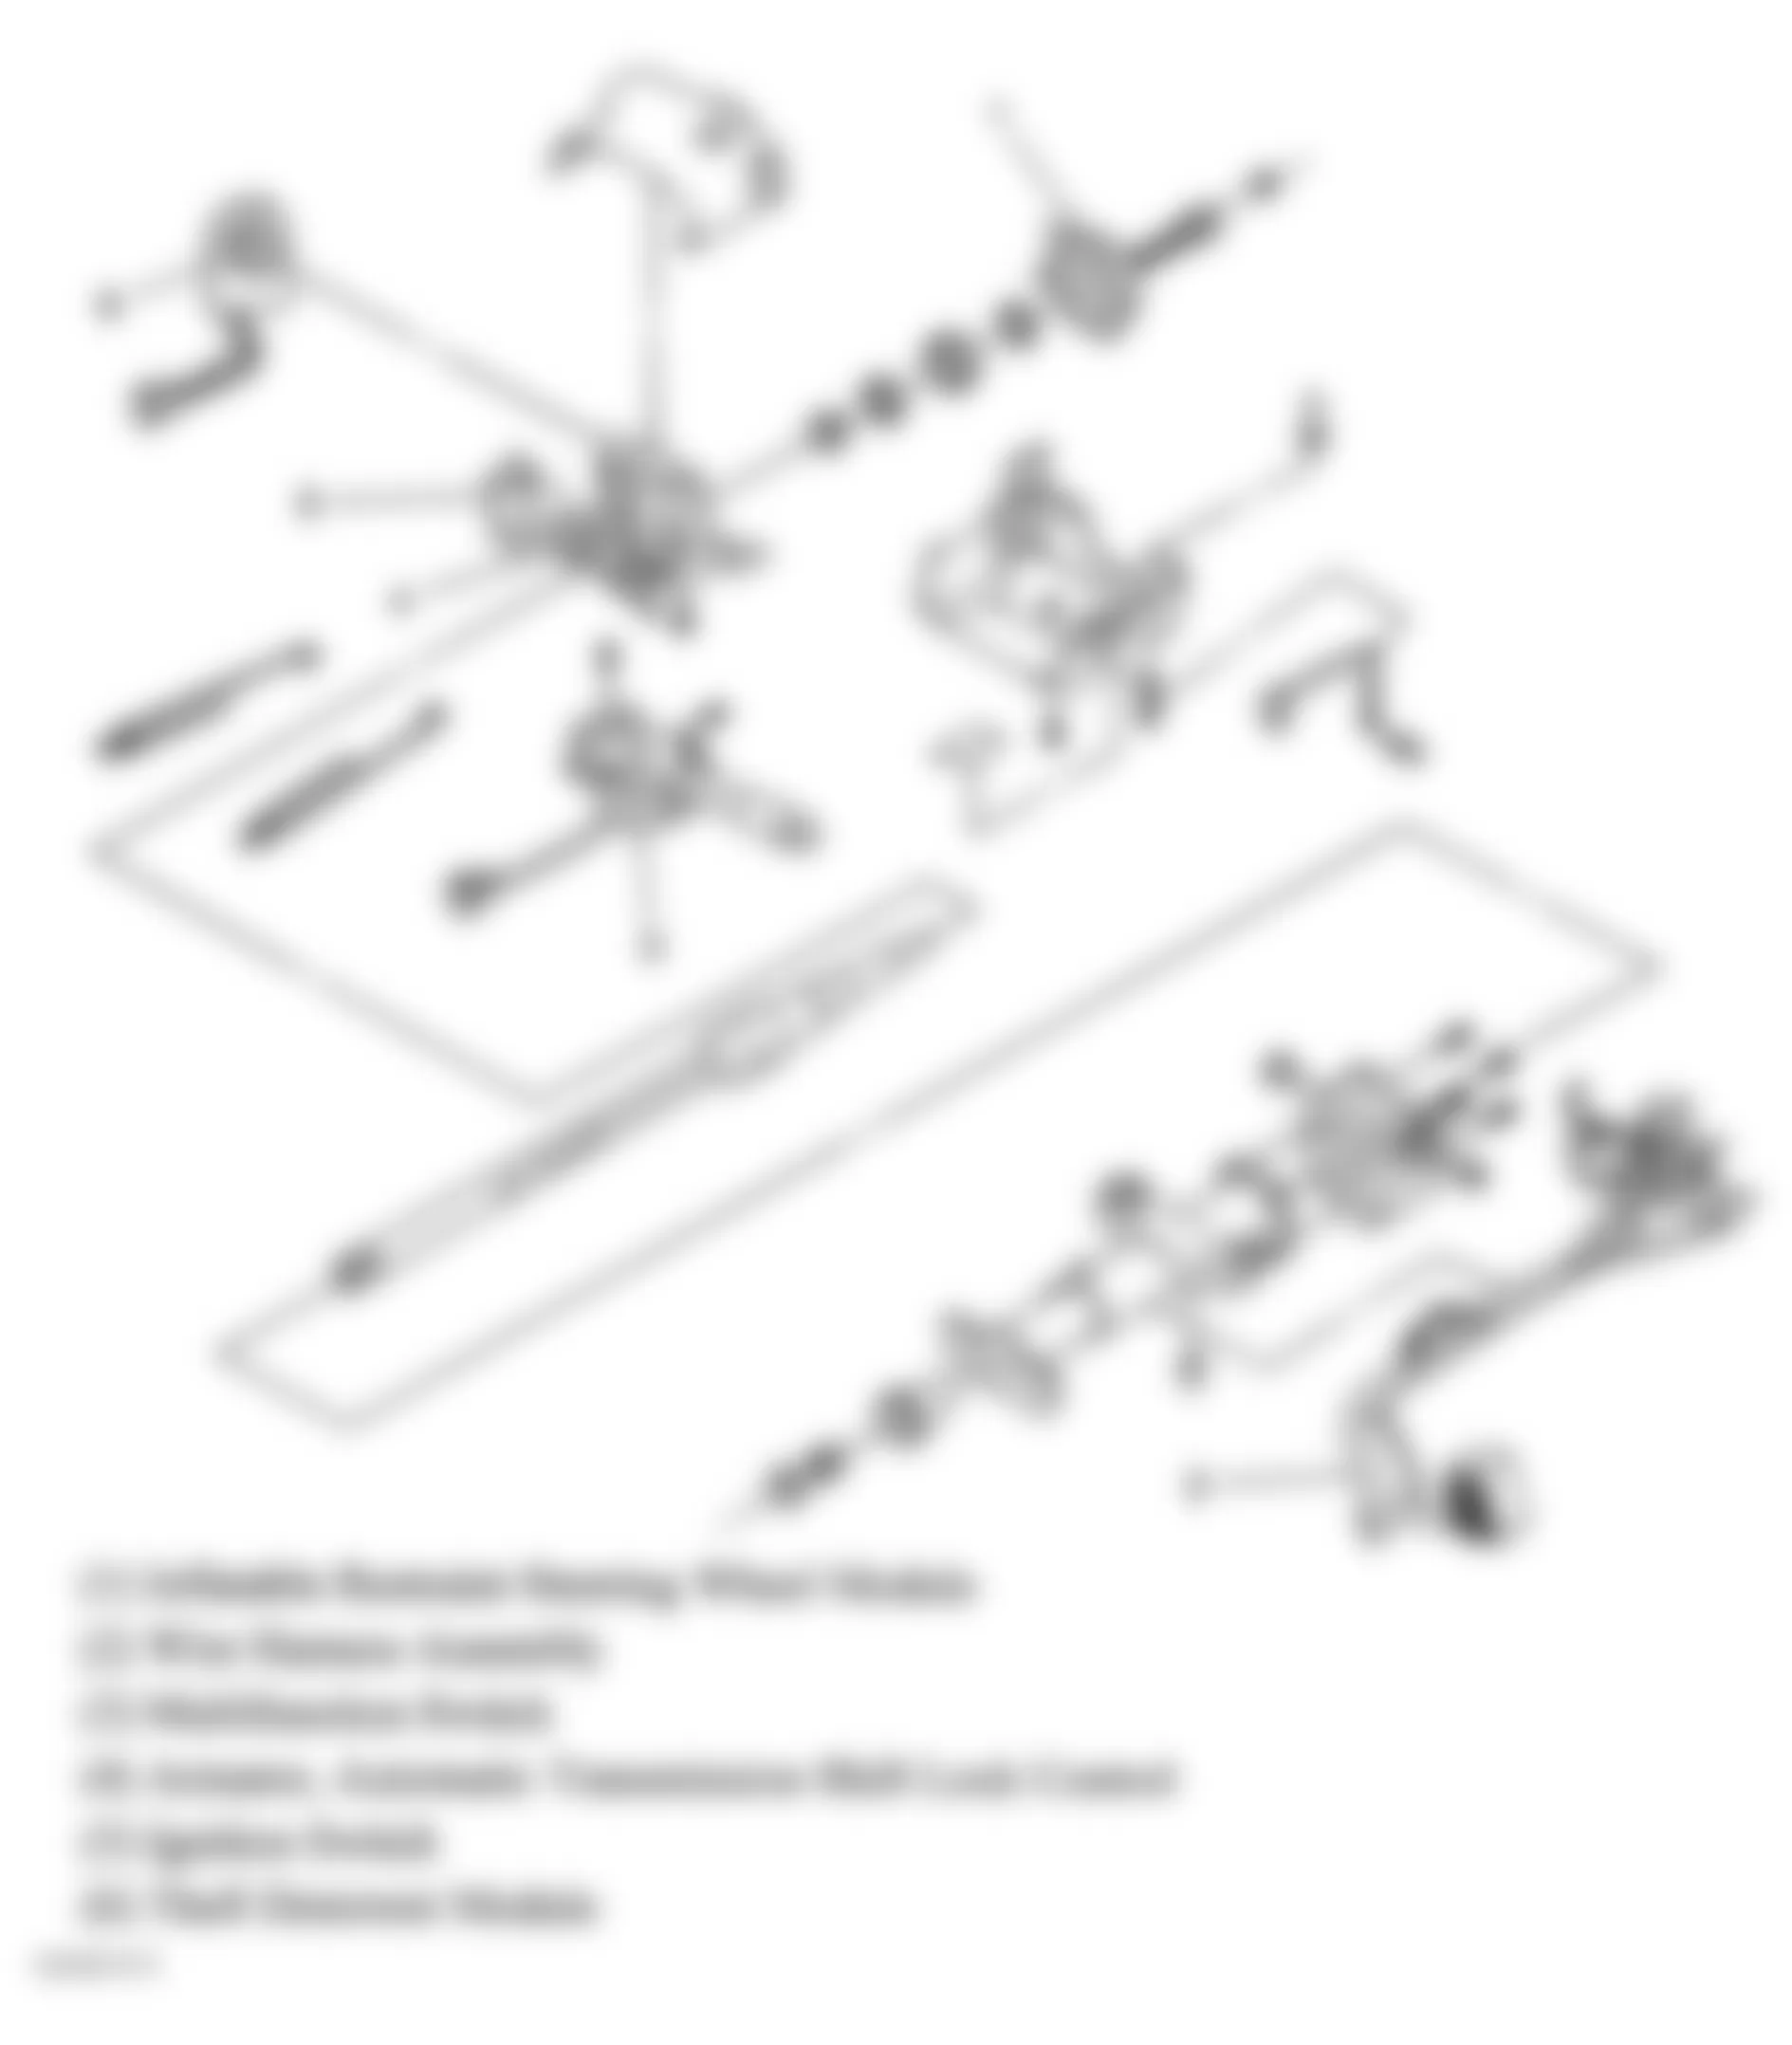 Buick Rendezvous Ultra 2004 - Component Locations -  Steering Column Disassembled View (Pontiac)